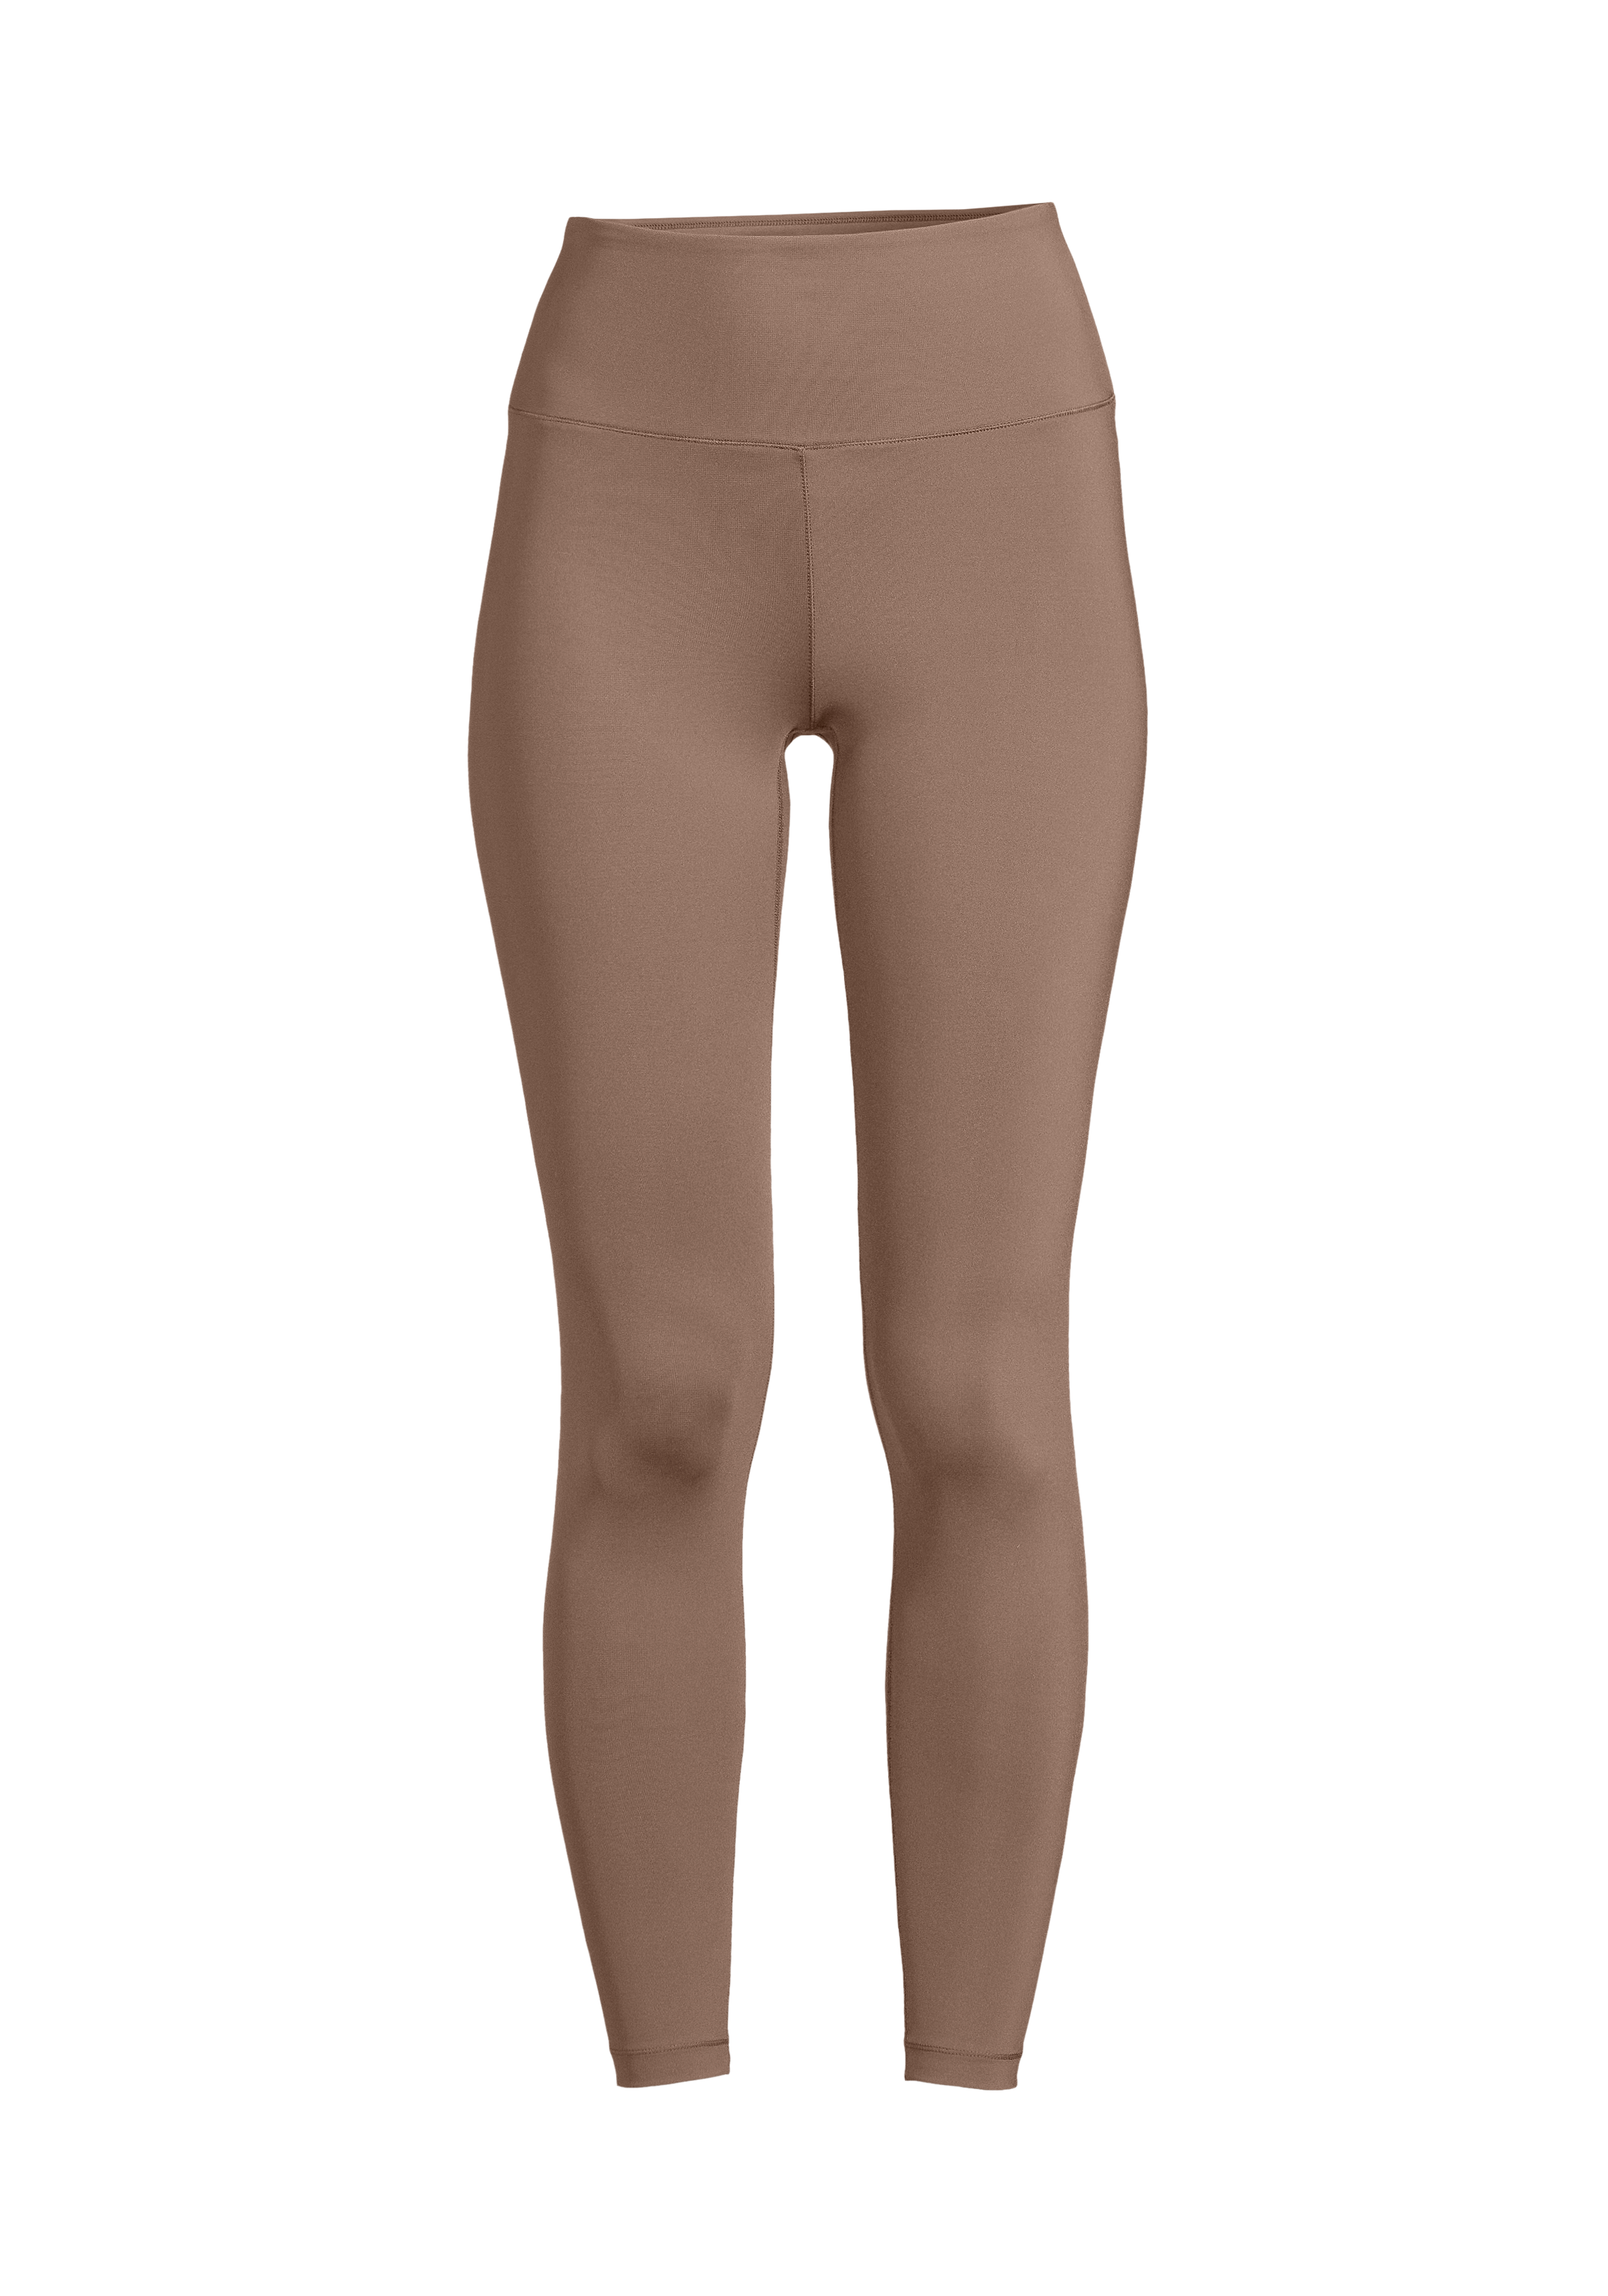 Casall GRAPHICAL HIGH WAIST - Leggings - taupe brown/taupe 